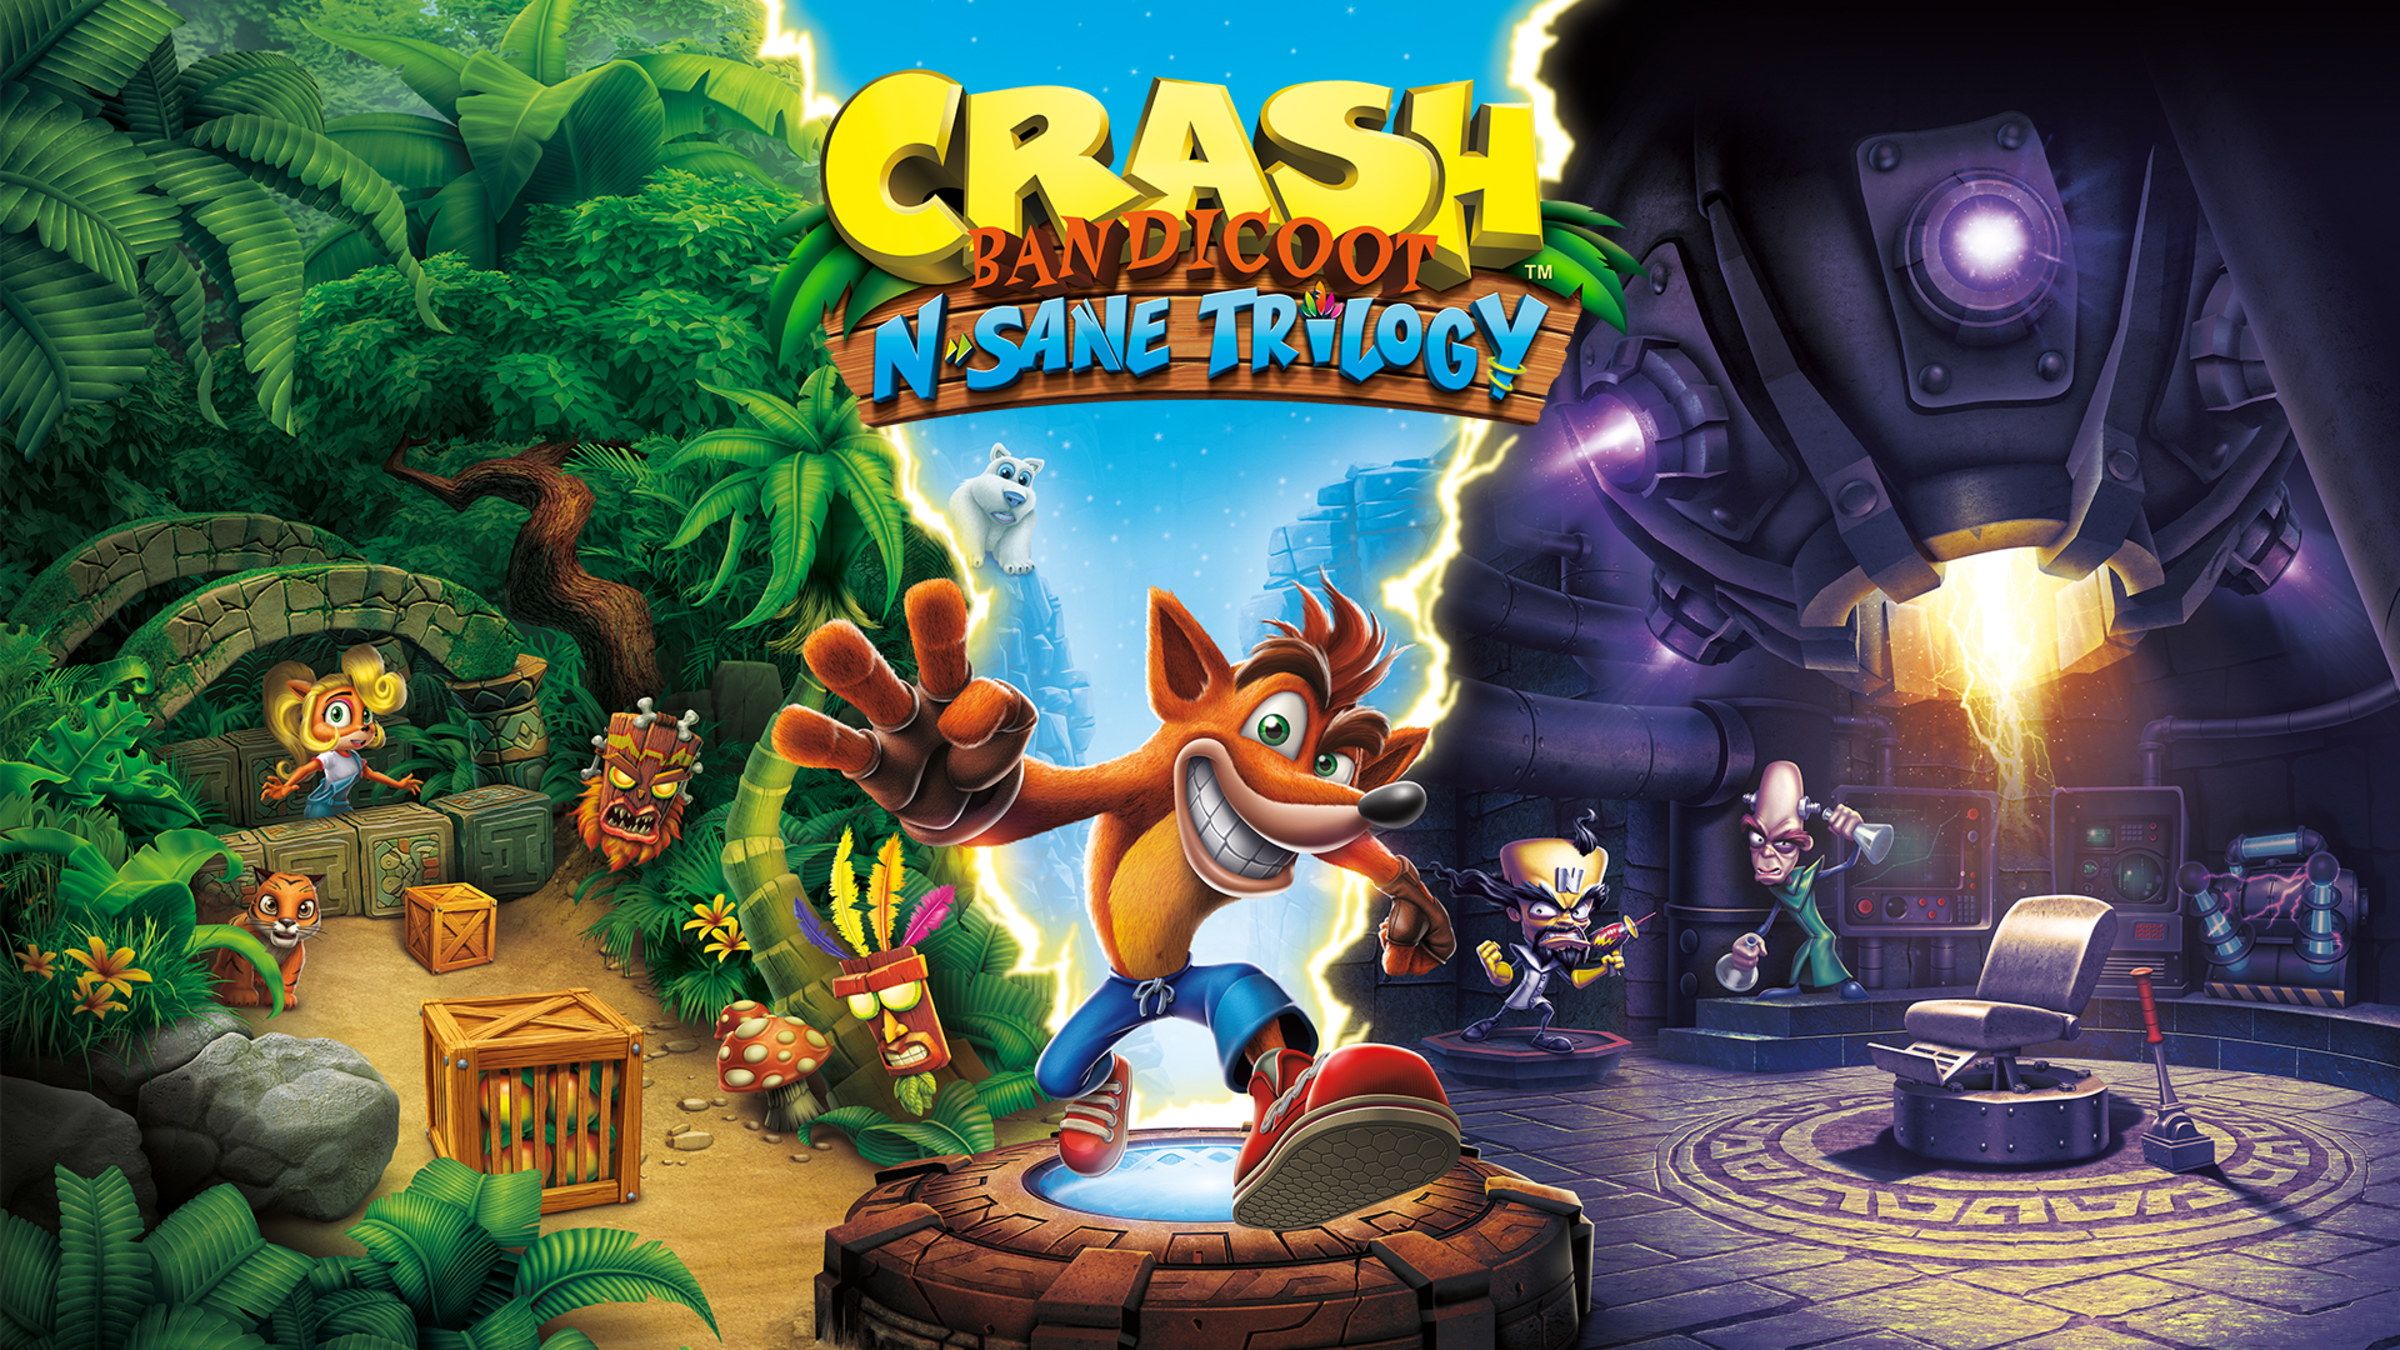 Crash Of The Titans Wii Used